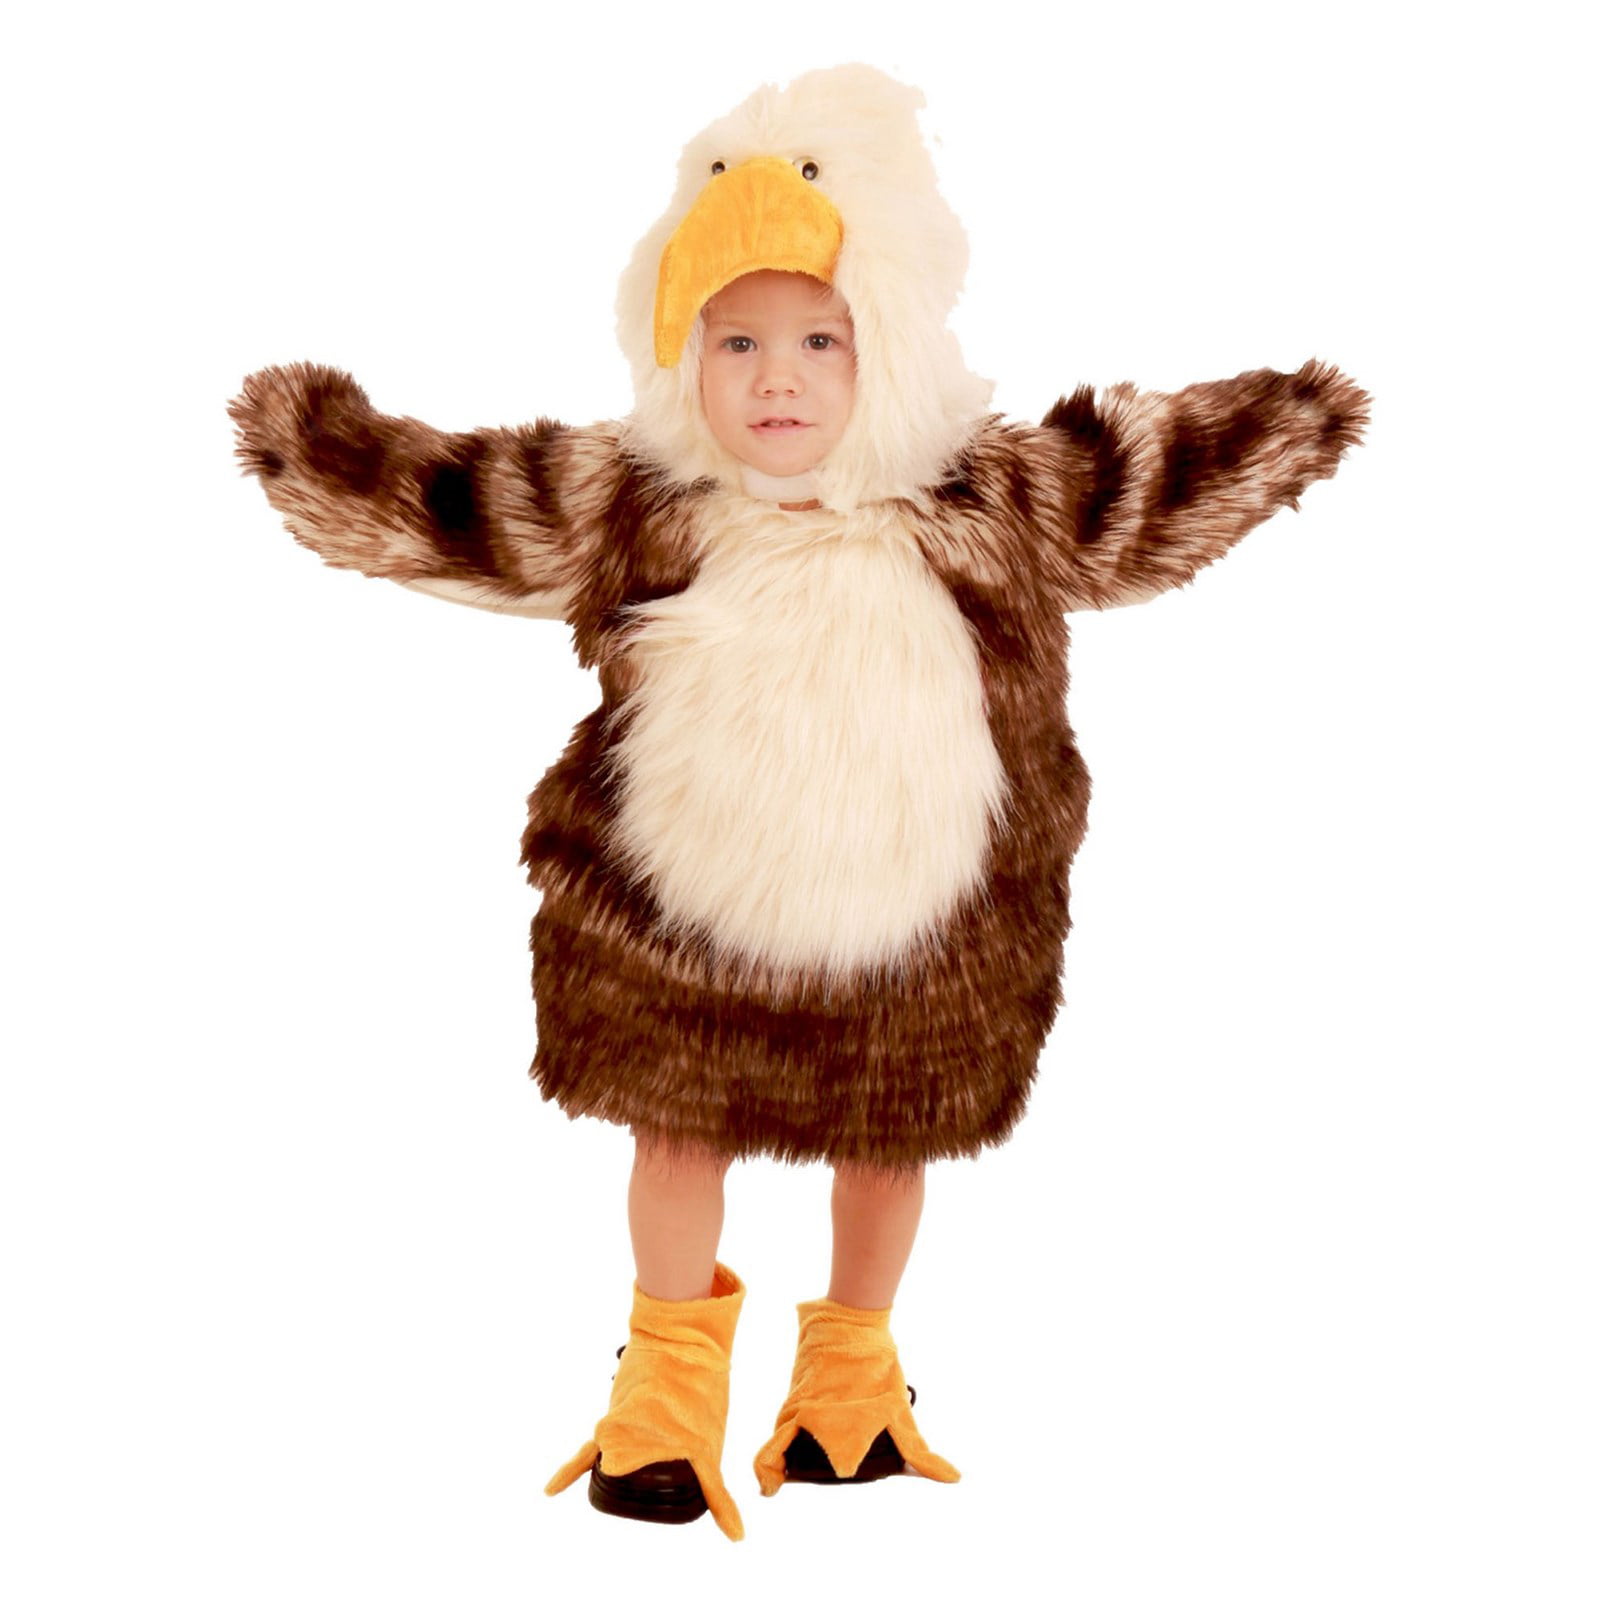 Baby Eagle Mascot Bird Costume - Maskus T0142 Bald Eagle Baby Chick One Size Fits Most / Standard Feet / Choose Custom Colors